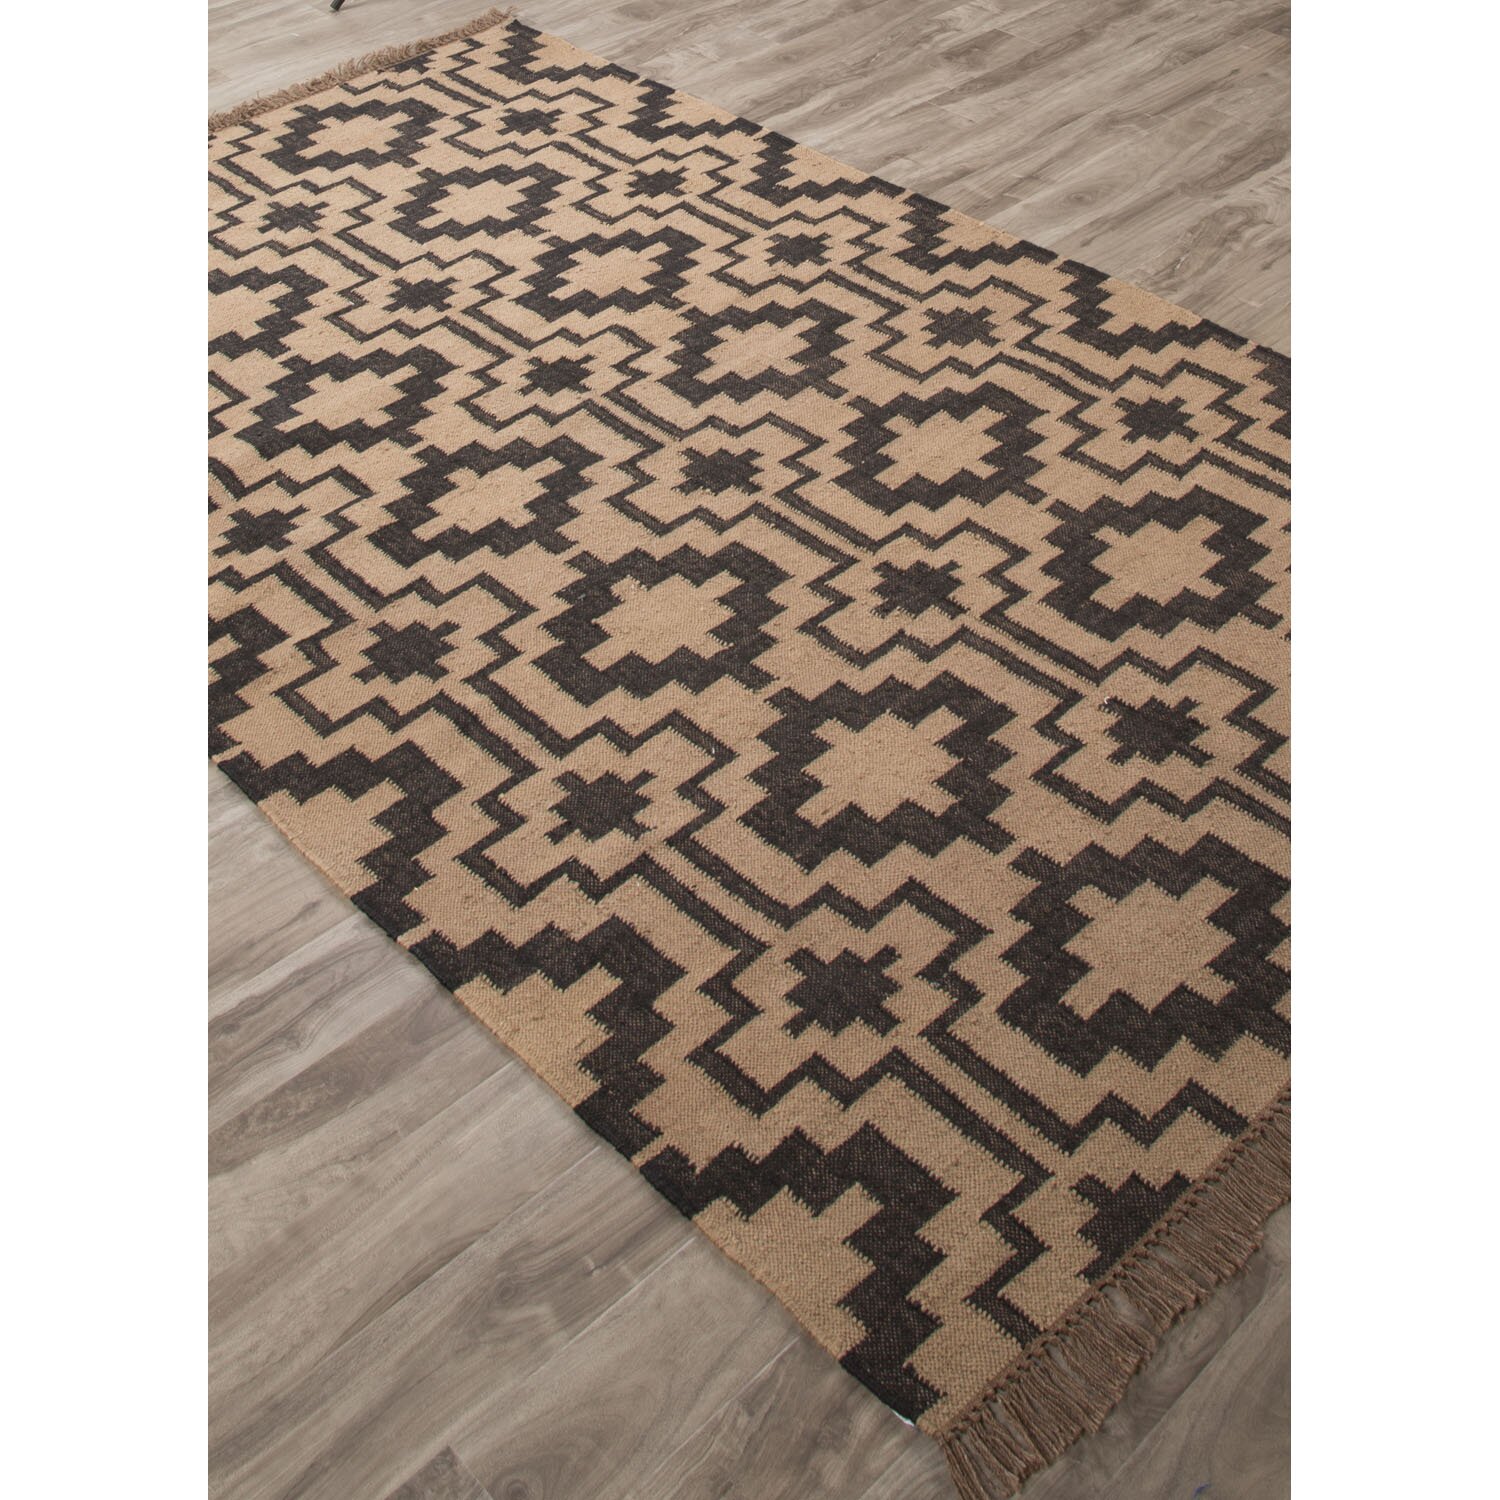 Modren Black And Tan Area Rugs Rug With Design